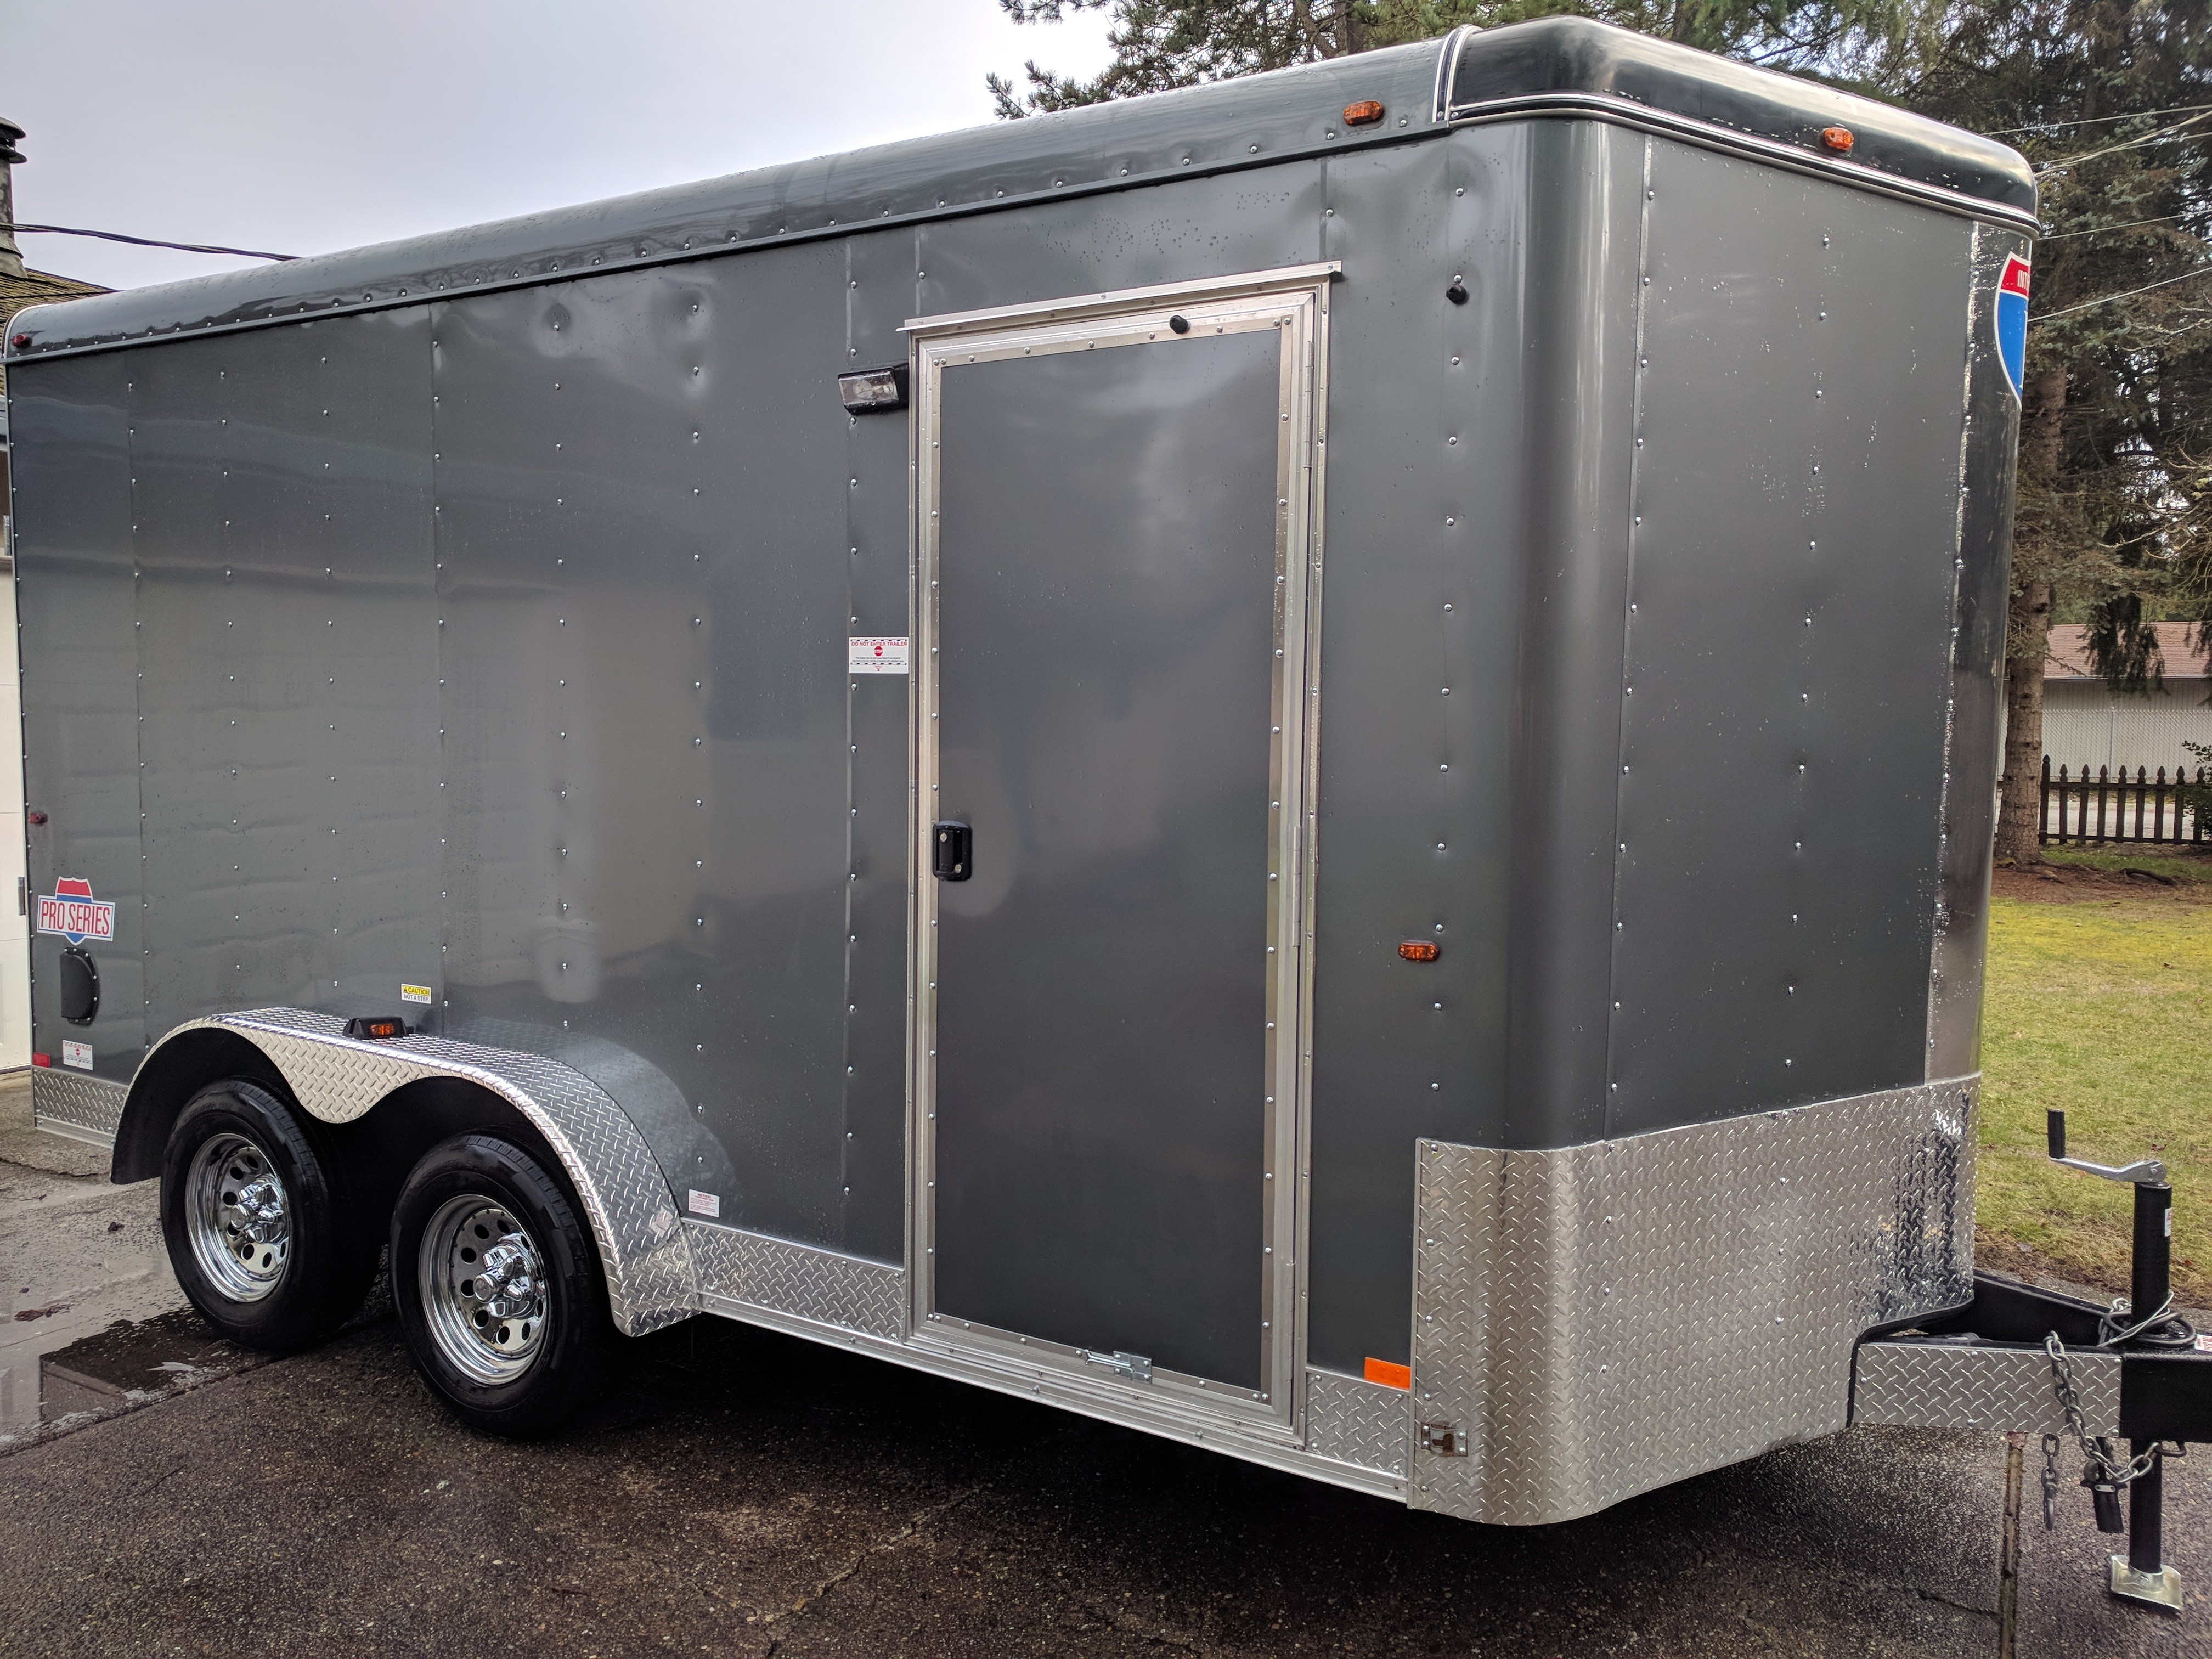 Buy & Sell New & Used Trailers 7x16 Interstate Pro Series Tandem Axle V nose Cargo at TrailerShopper